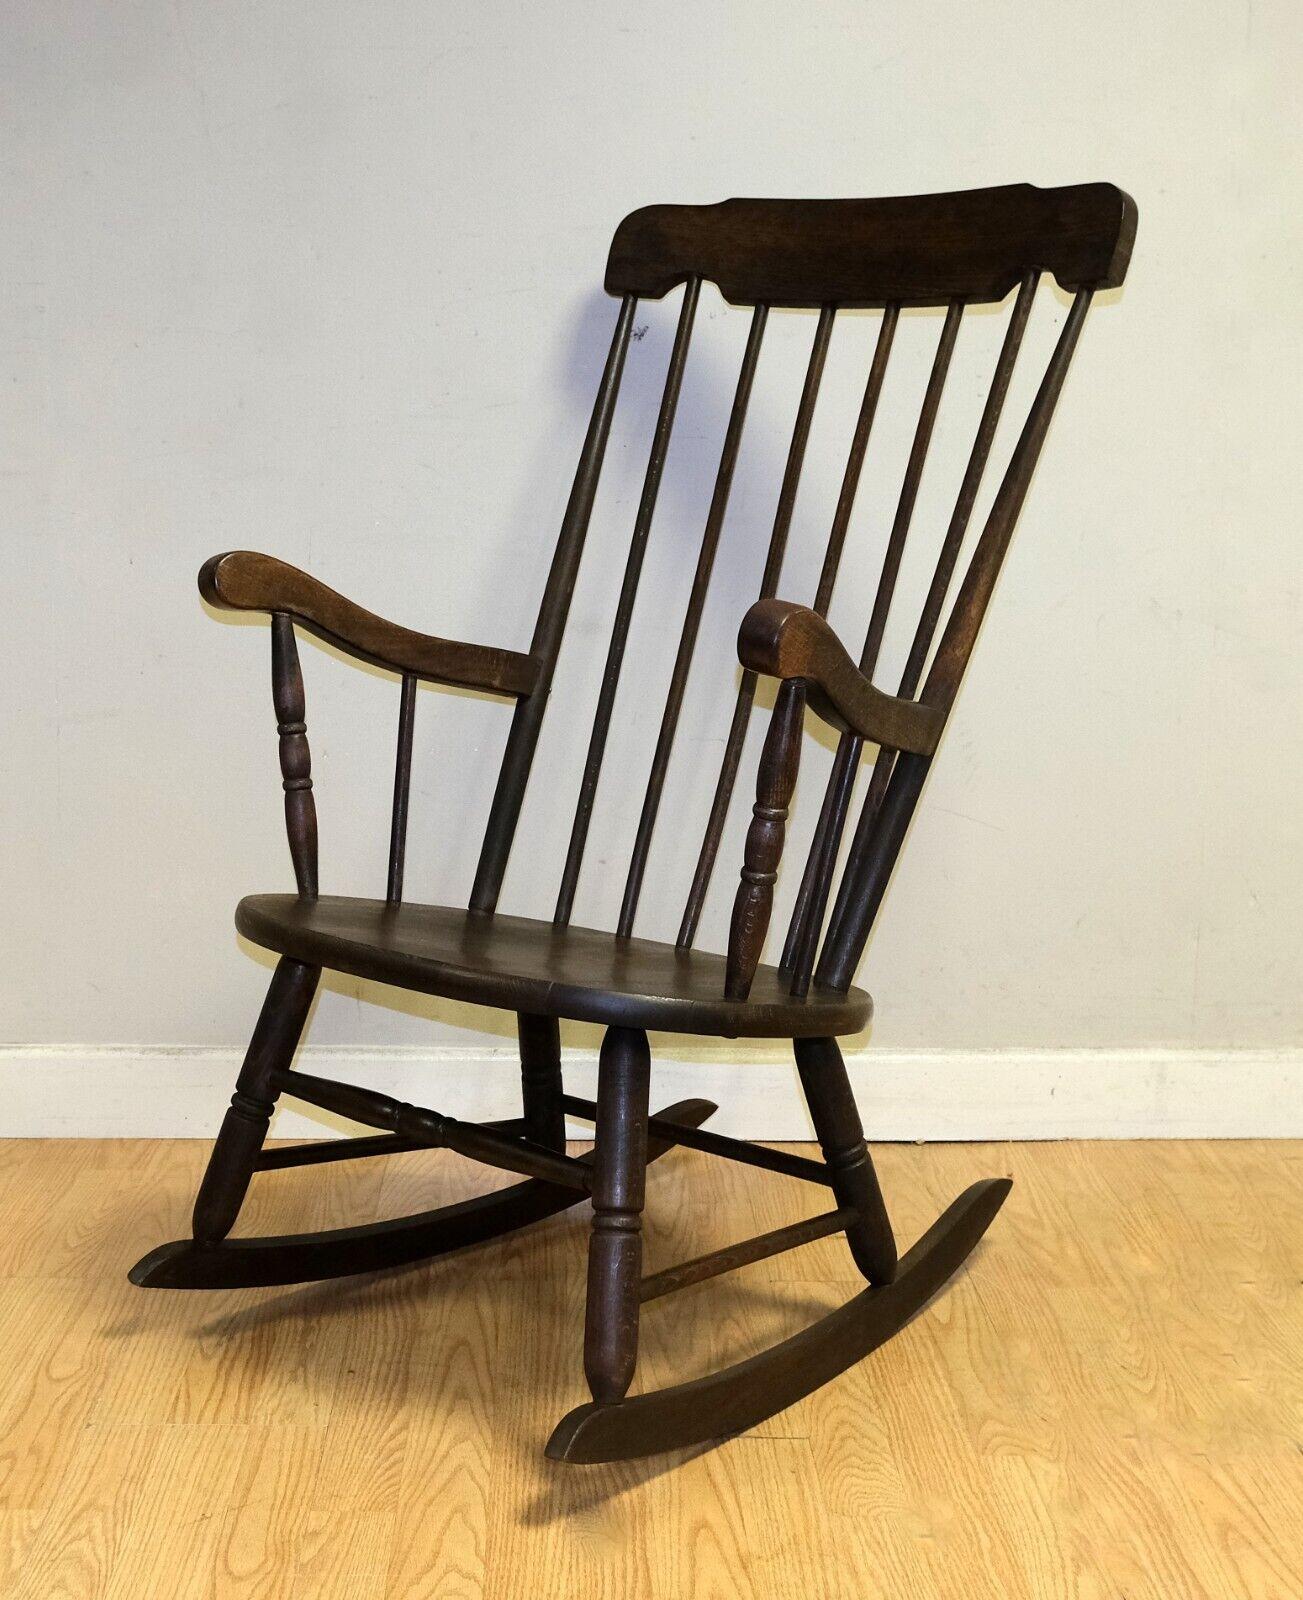 We are delighted to offer for sale this Victorian Windsor Elm slat back rocking chair.

This simple yet classic Windsor rocking chair is presented with a generous seat area and comfortable high back rest. The piece presents a pair of arm rest